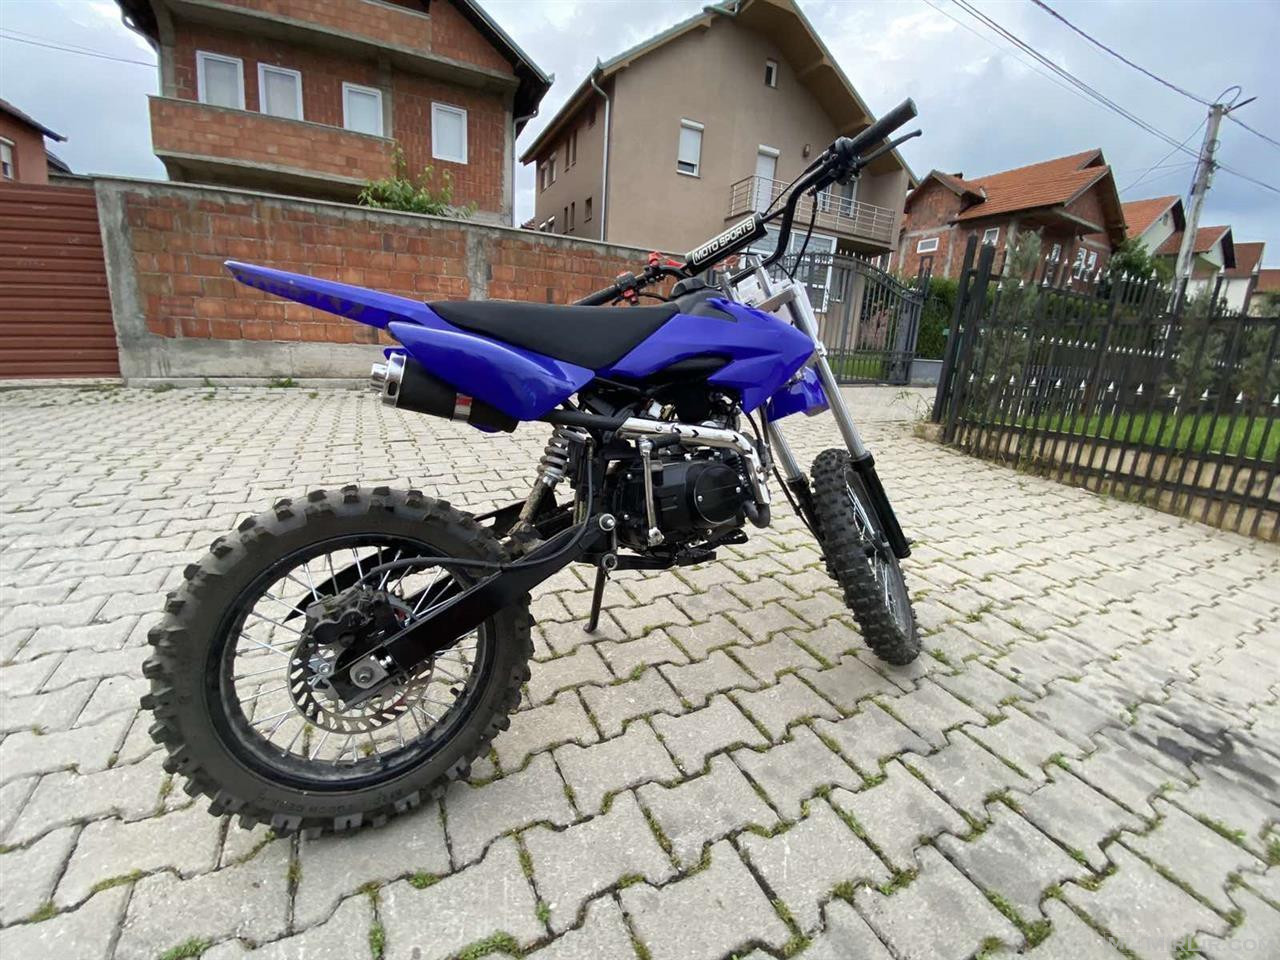 Shes cross125cc